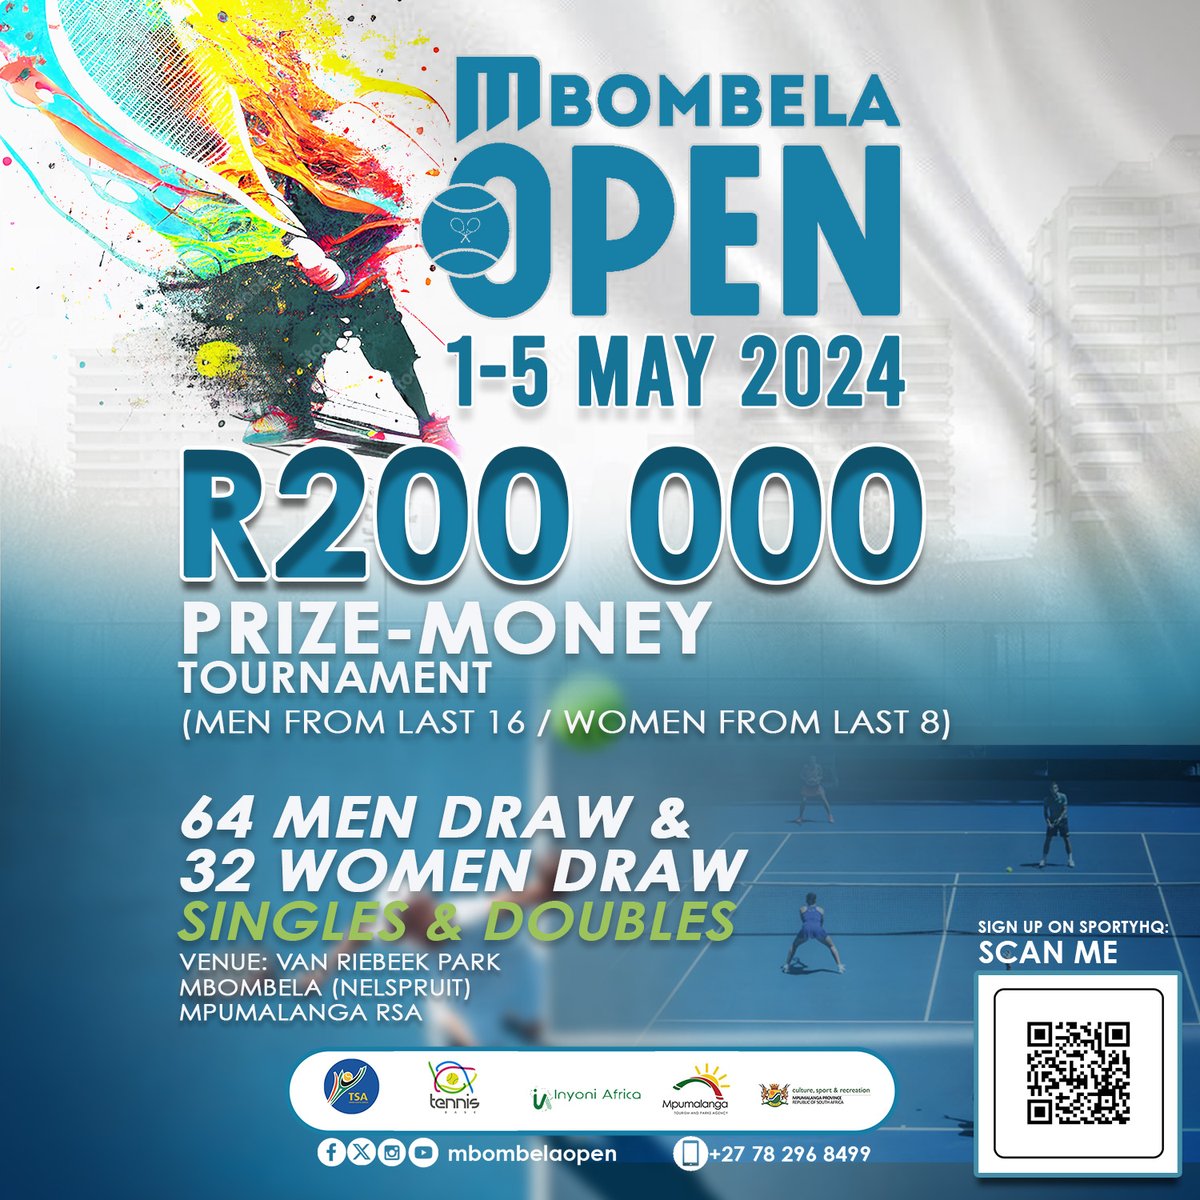 ⏰ Tick tock! Just 2⃣ weeks left until the @MbombelaOpen! This first-of-its-kind event is offering a massive R200,000 prize pool! Don't wait any longer—register now and be part of this exciting tournament. To enter, visit: tsa.sportyhq.com/tournament/vie… #MbombelaOpen